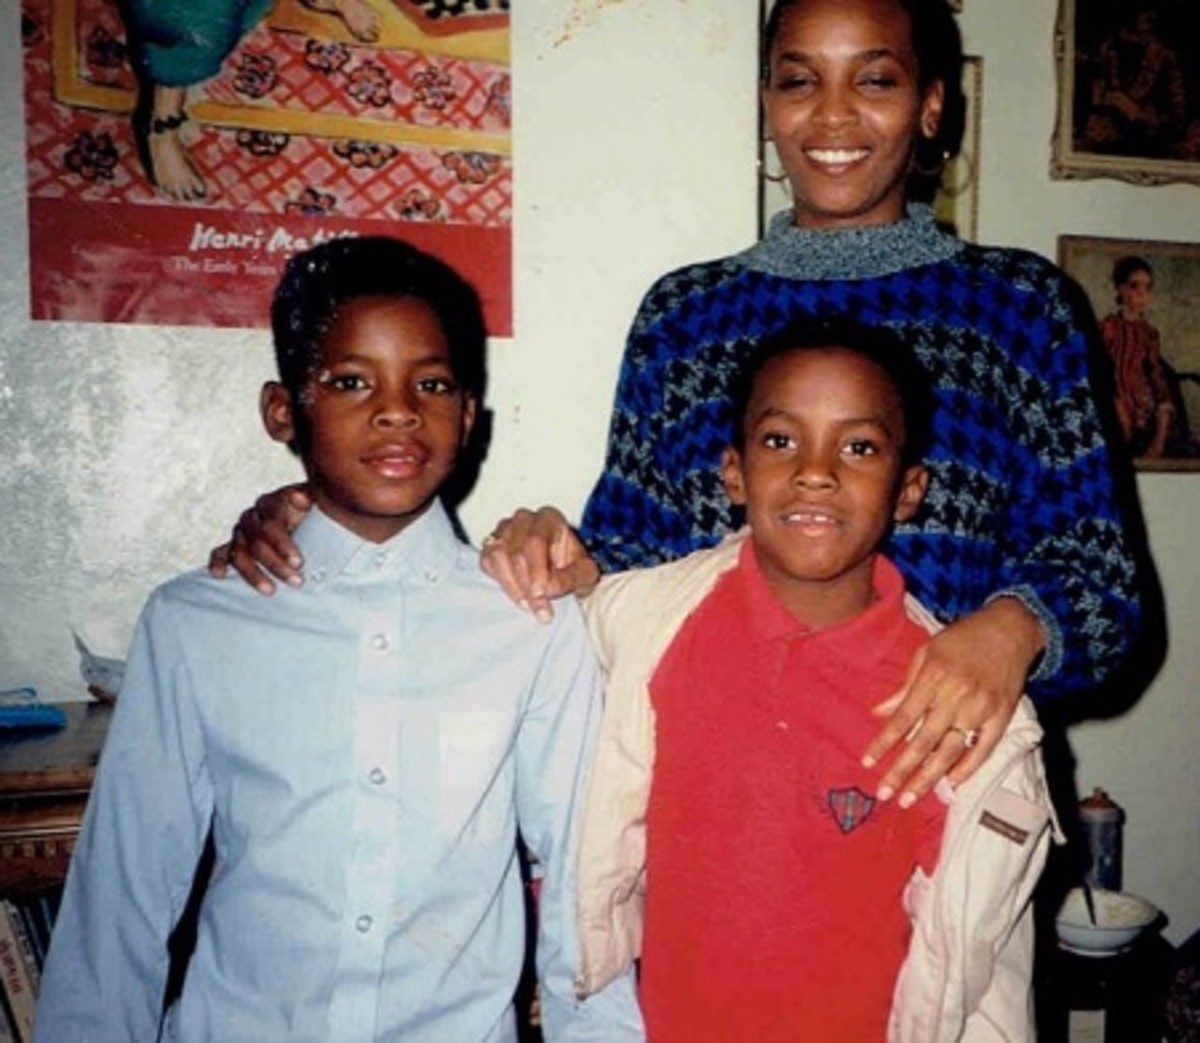 Carrington (red shirt) with his brother